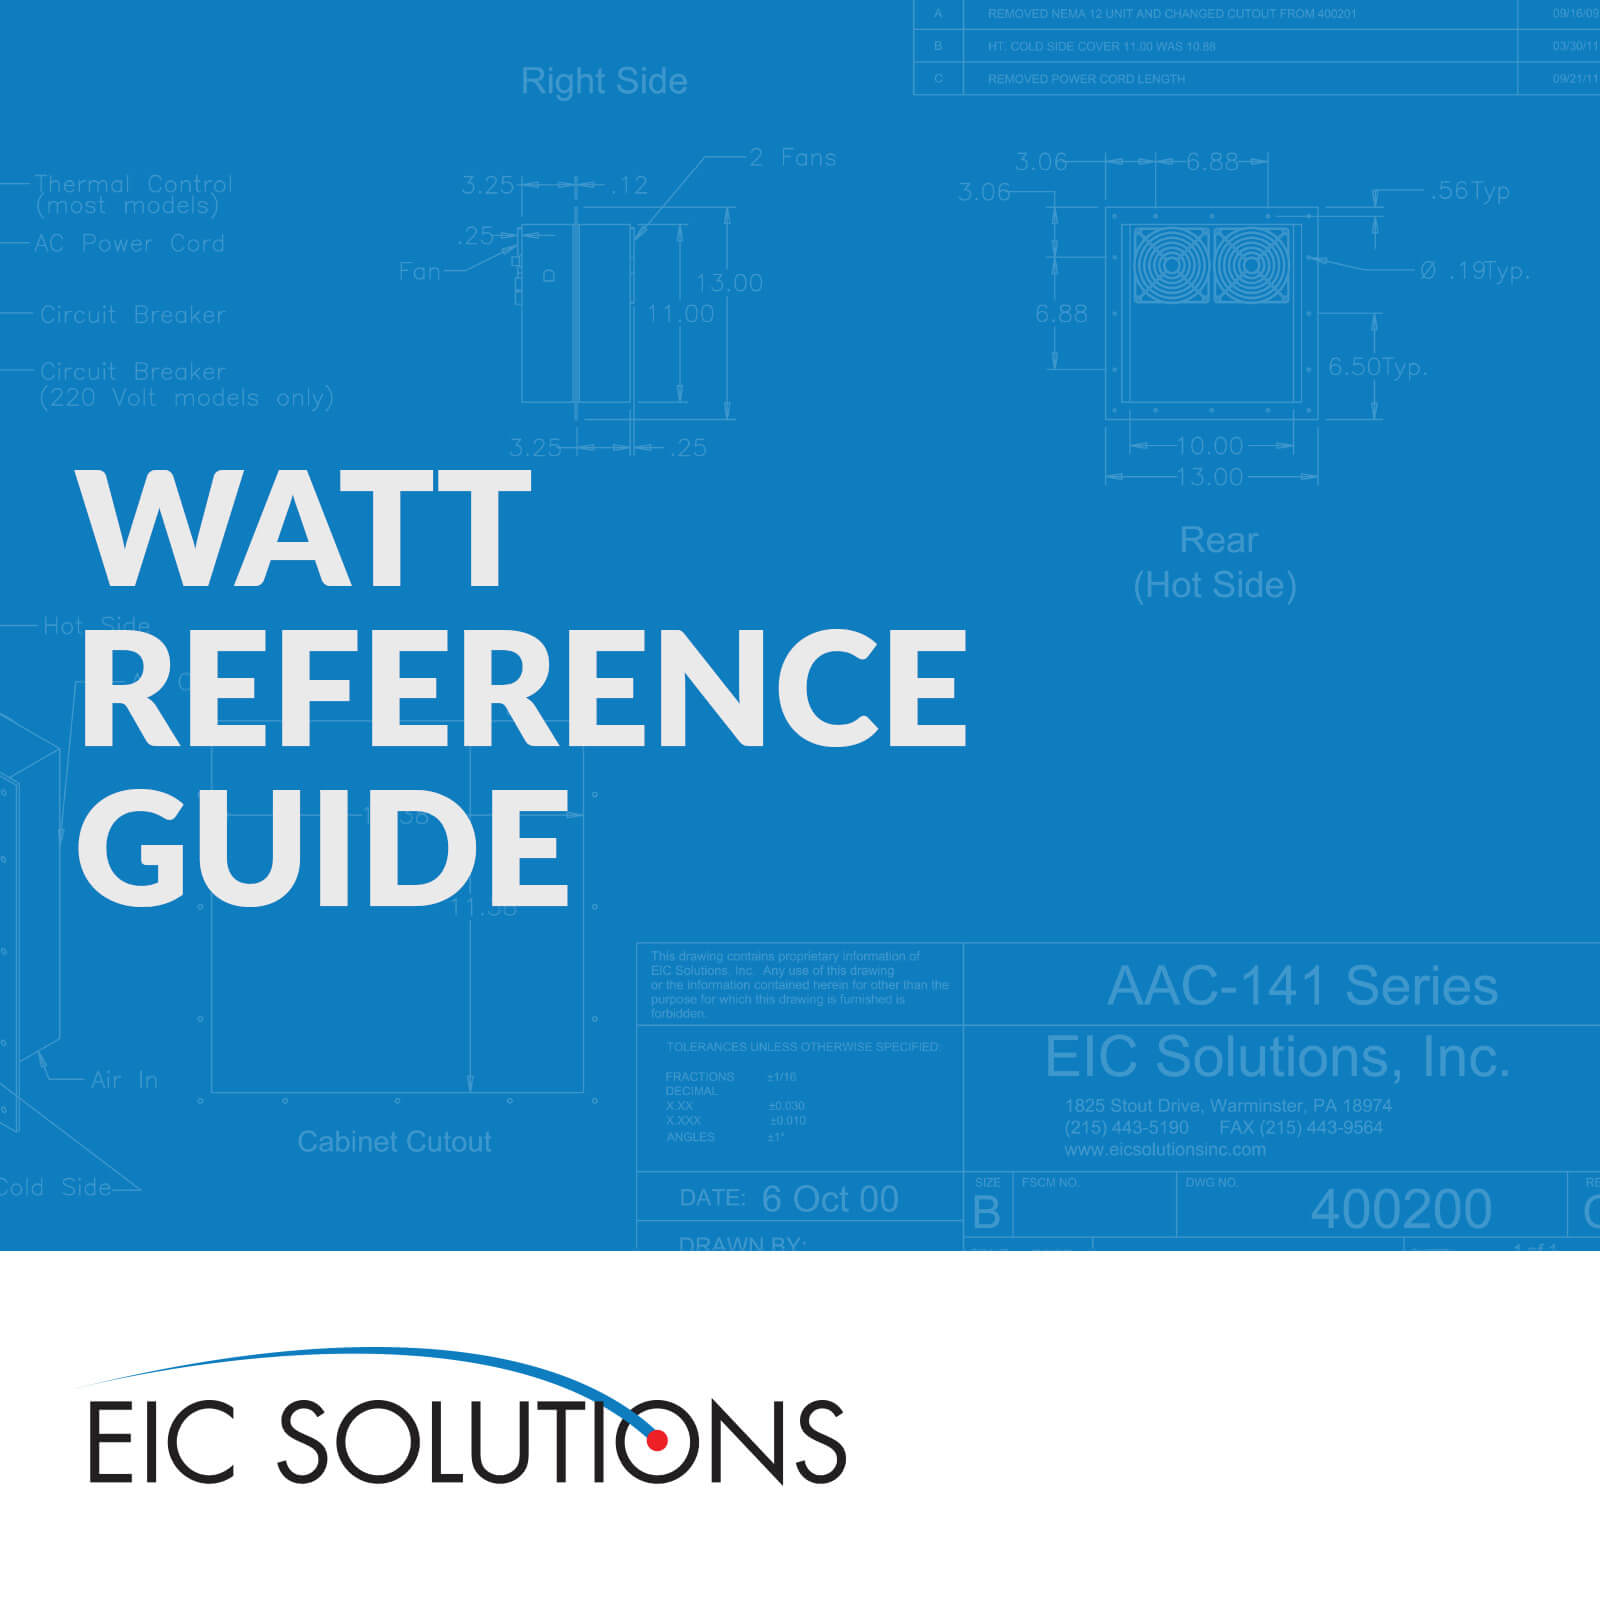 Watt Reference Guide graphic